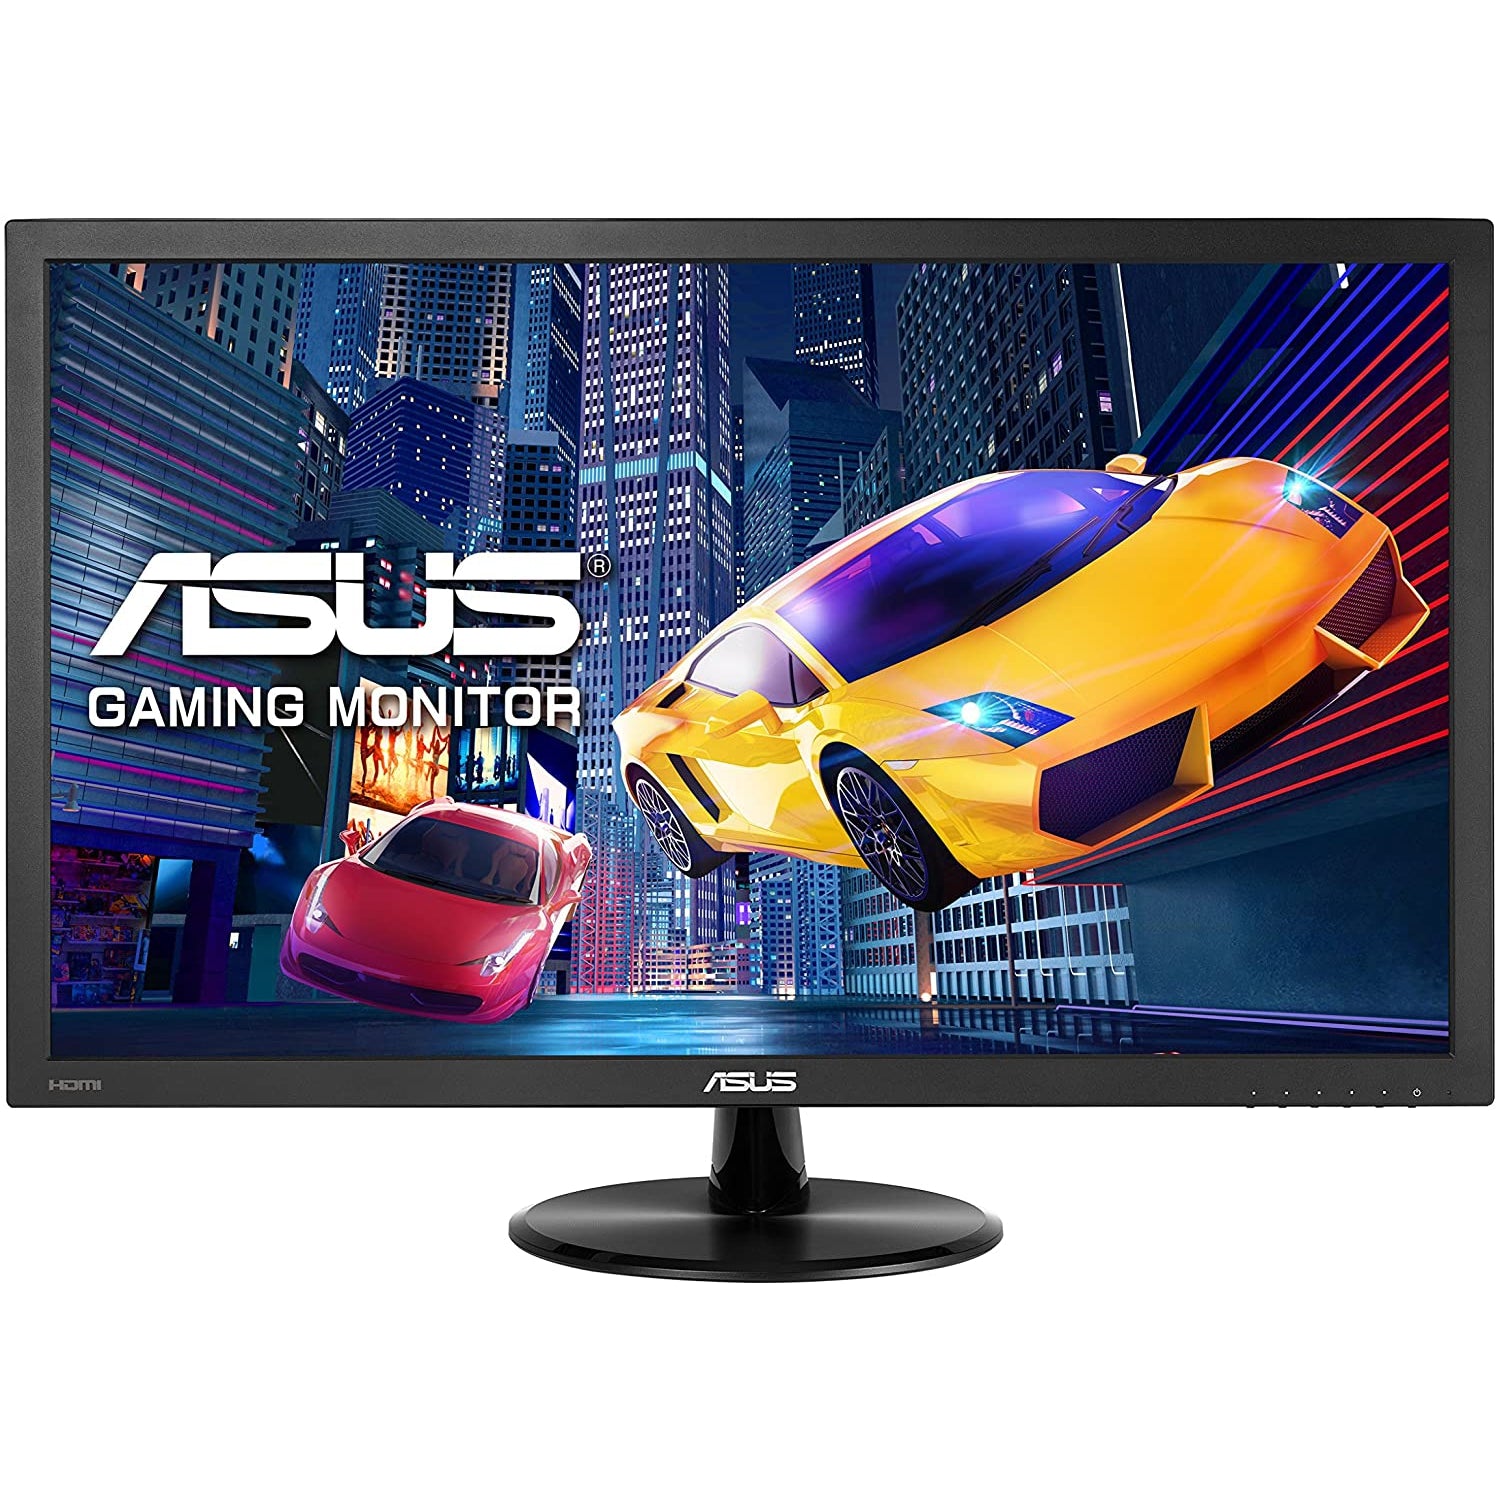 Asus VP228HE, 21.5 Inch FHD (1920x1080) Gaming Monitor